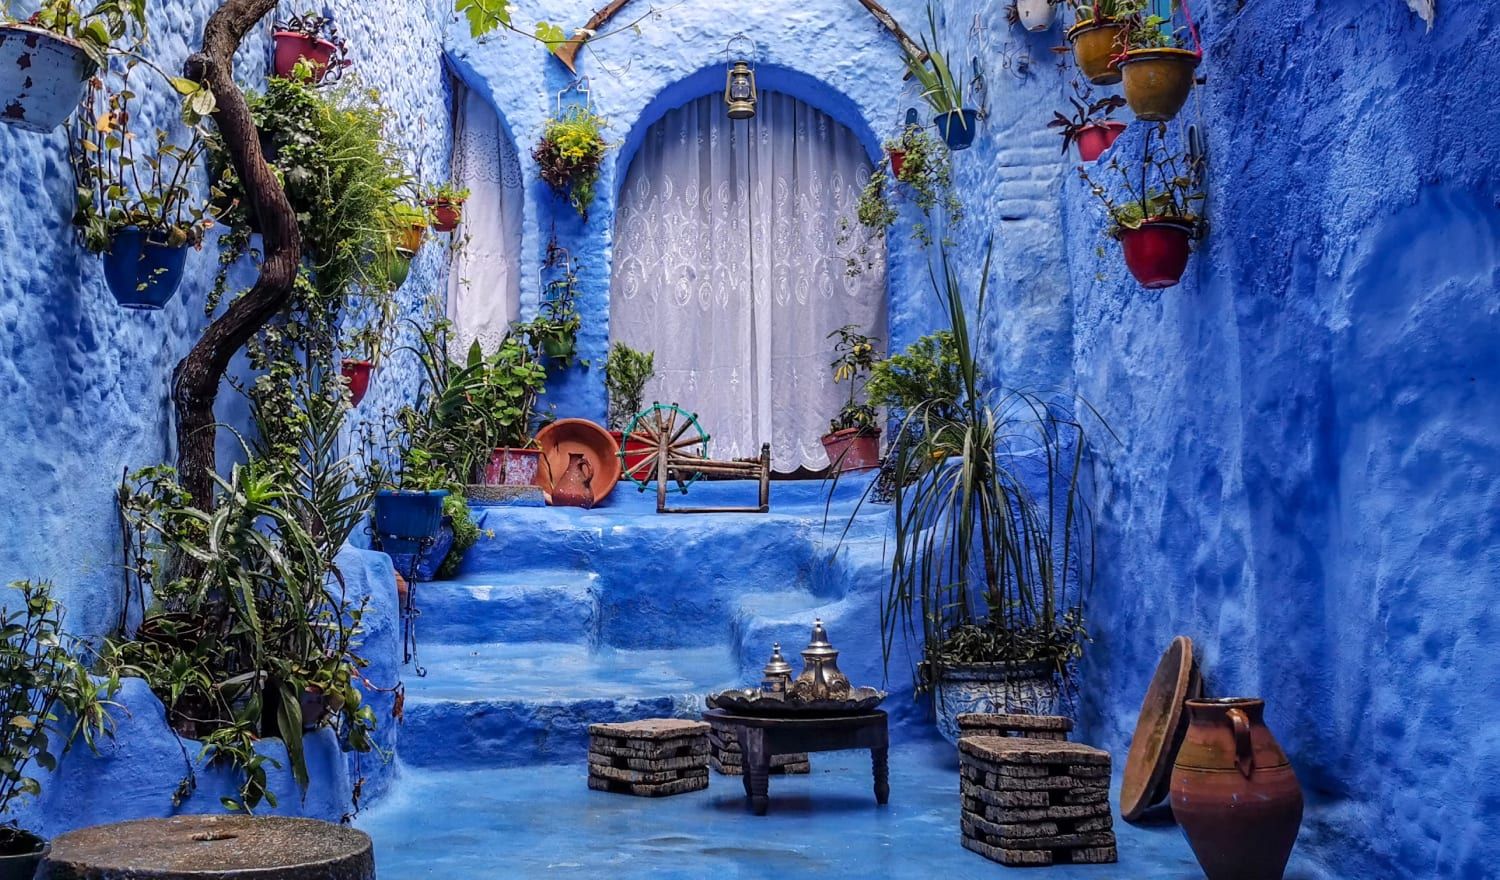 The blue marvel painted buildings of Chefchaouen.